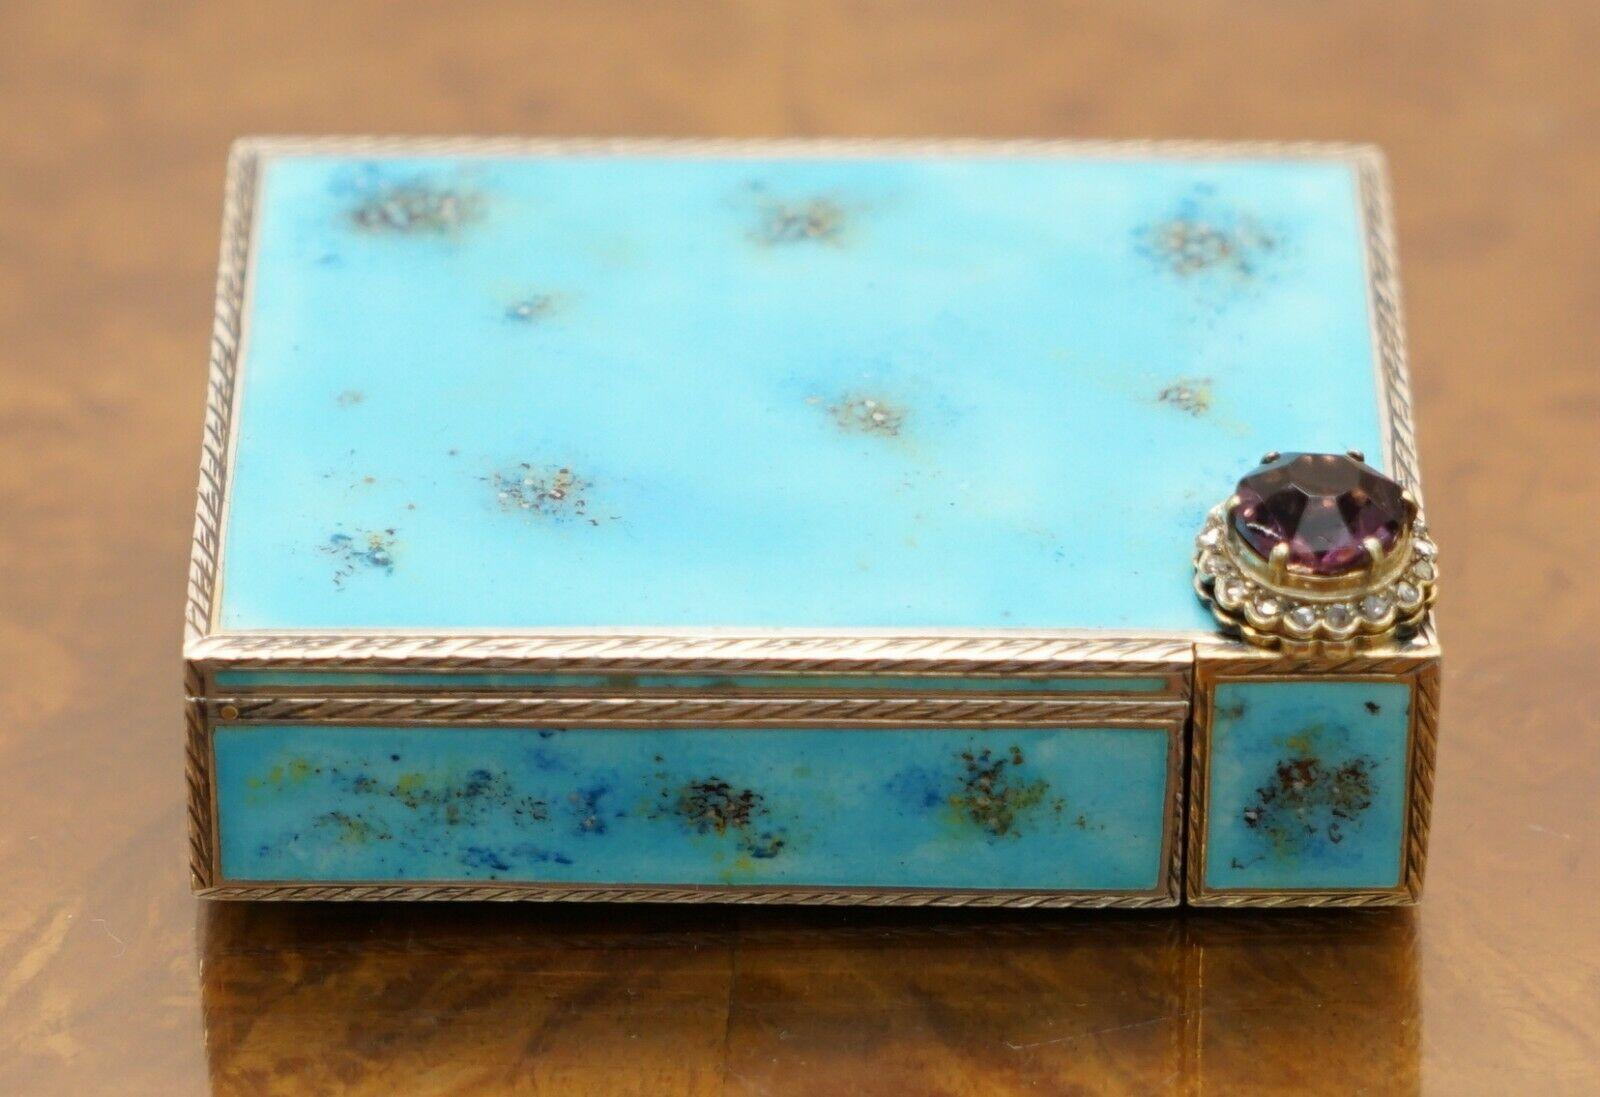 Wimbledon Furniture We are delighted to offer For sale this stunning circa 1900 French or Italian Sterling silver Diamond & Enamel powder compact with lipstick

A very good looking and beautifully crafted piece, the diamonds are all real bar one